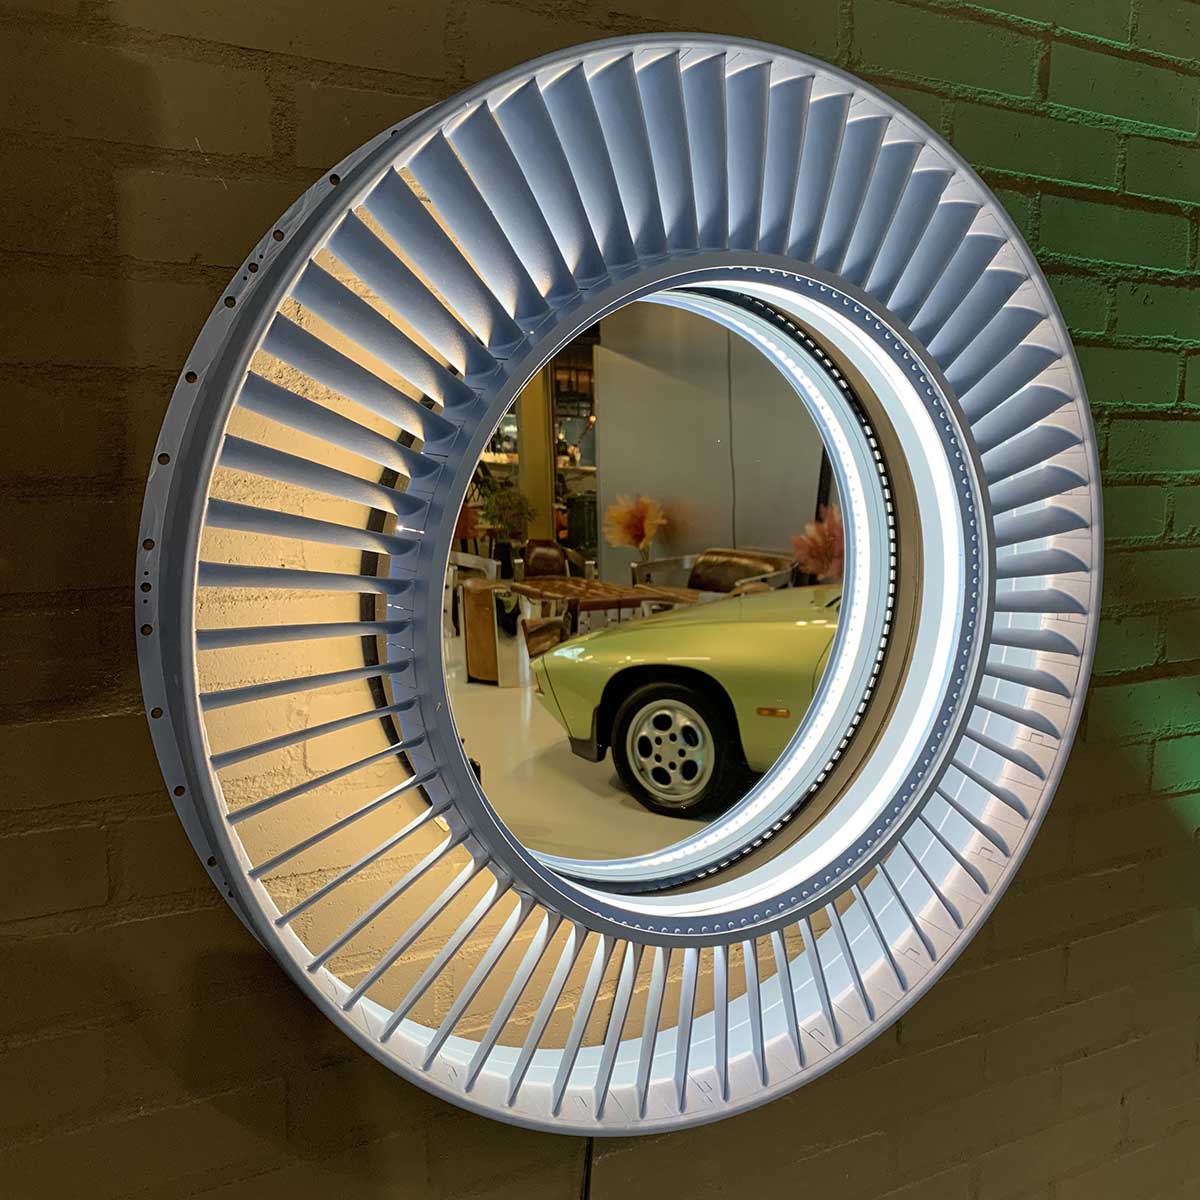 Mirror made from a Pratt & Whitney jet engine stator hanging on a brick wall in Kaeve, reflecting a Porsche car.